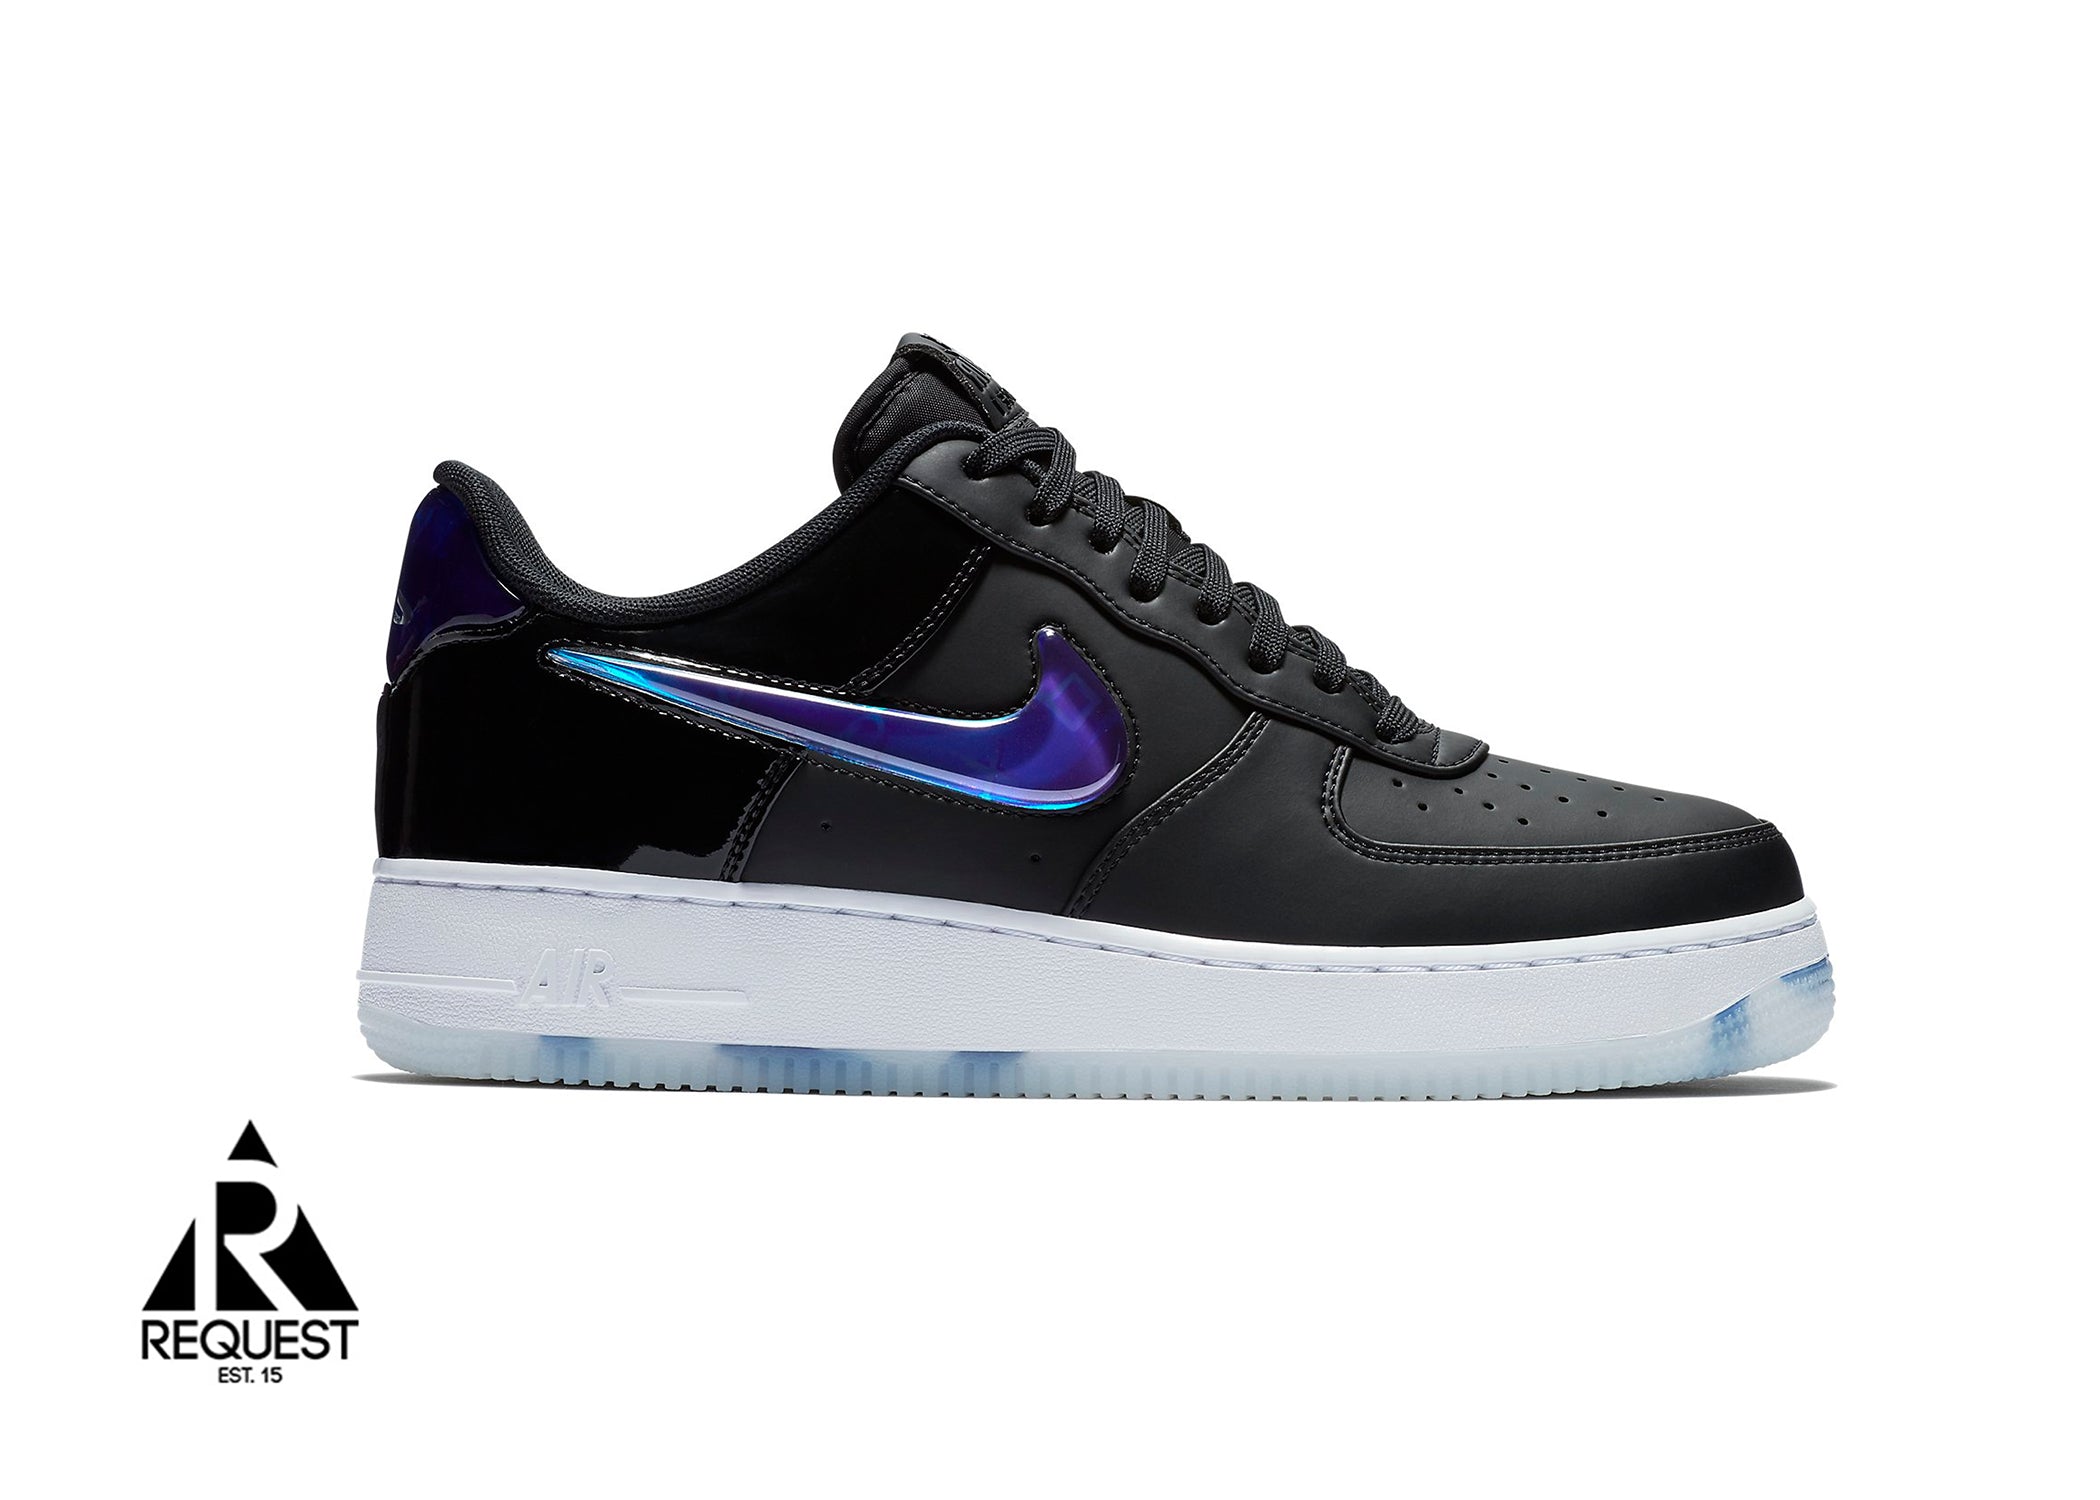 Nike Air Force “Black PlayStation” Request